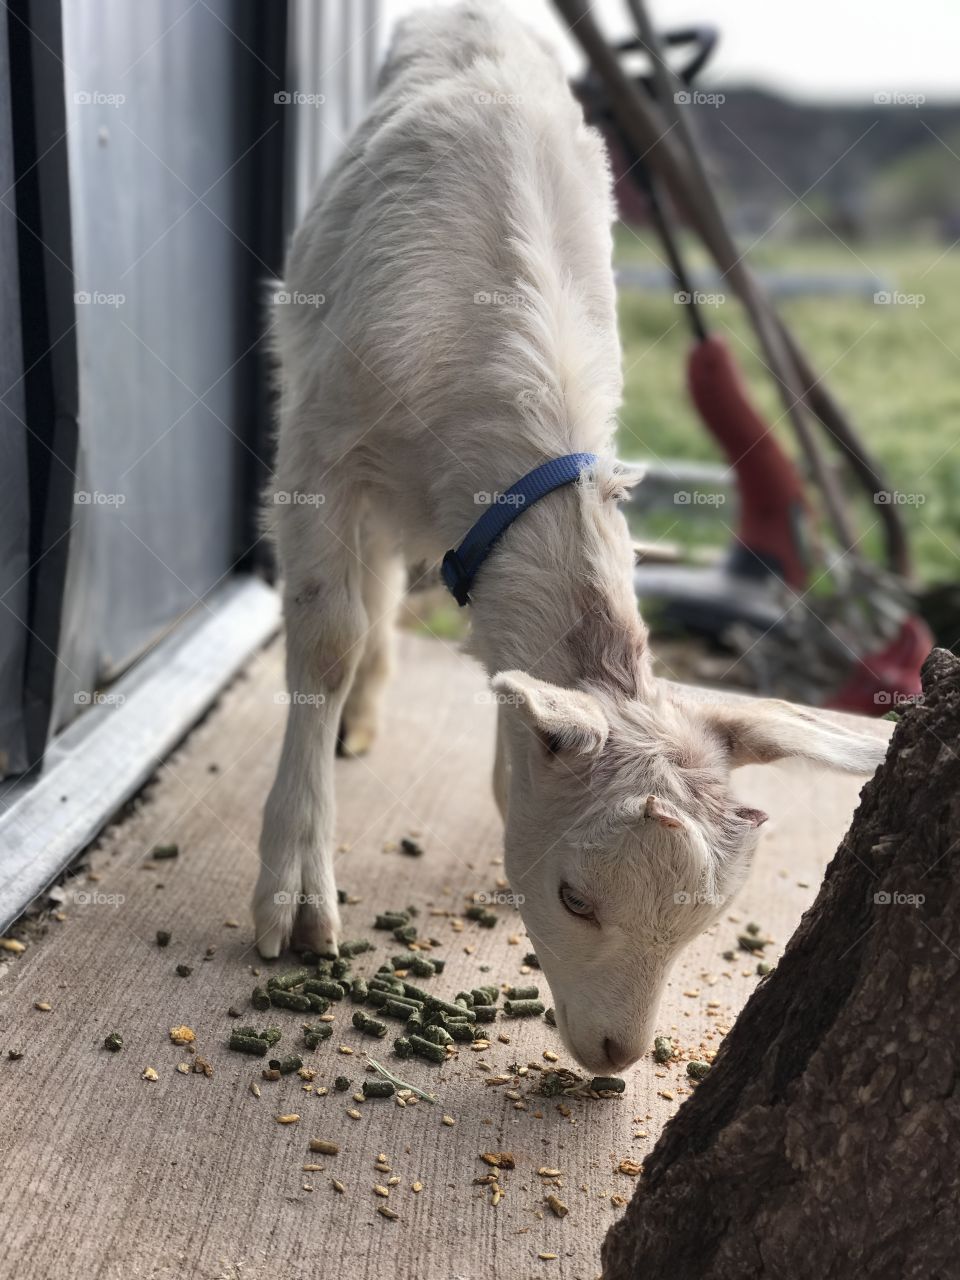 Snack time on the farm. 